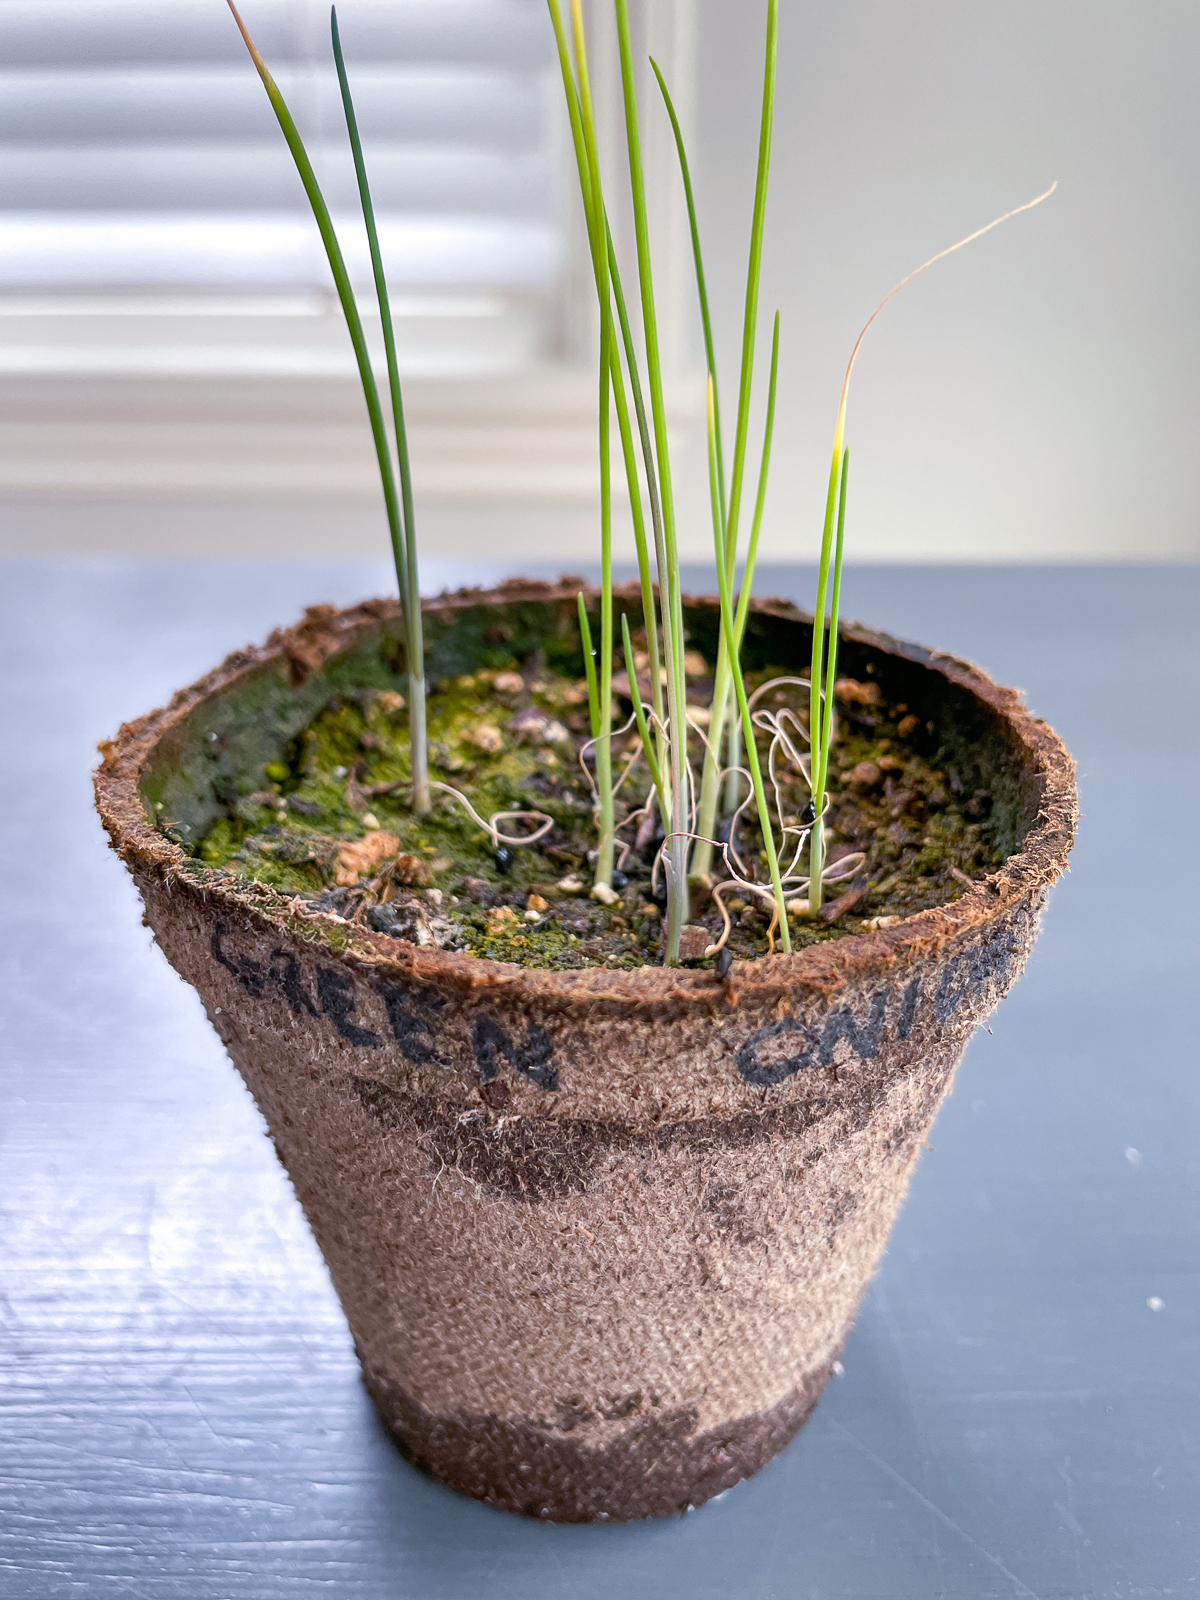 green onion seedlings with scorched tips from hot grow lights